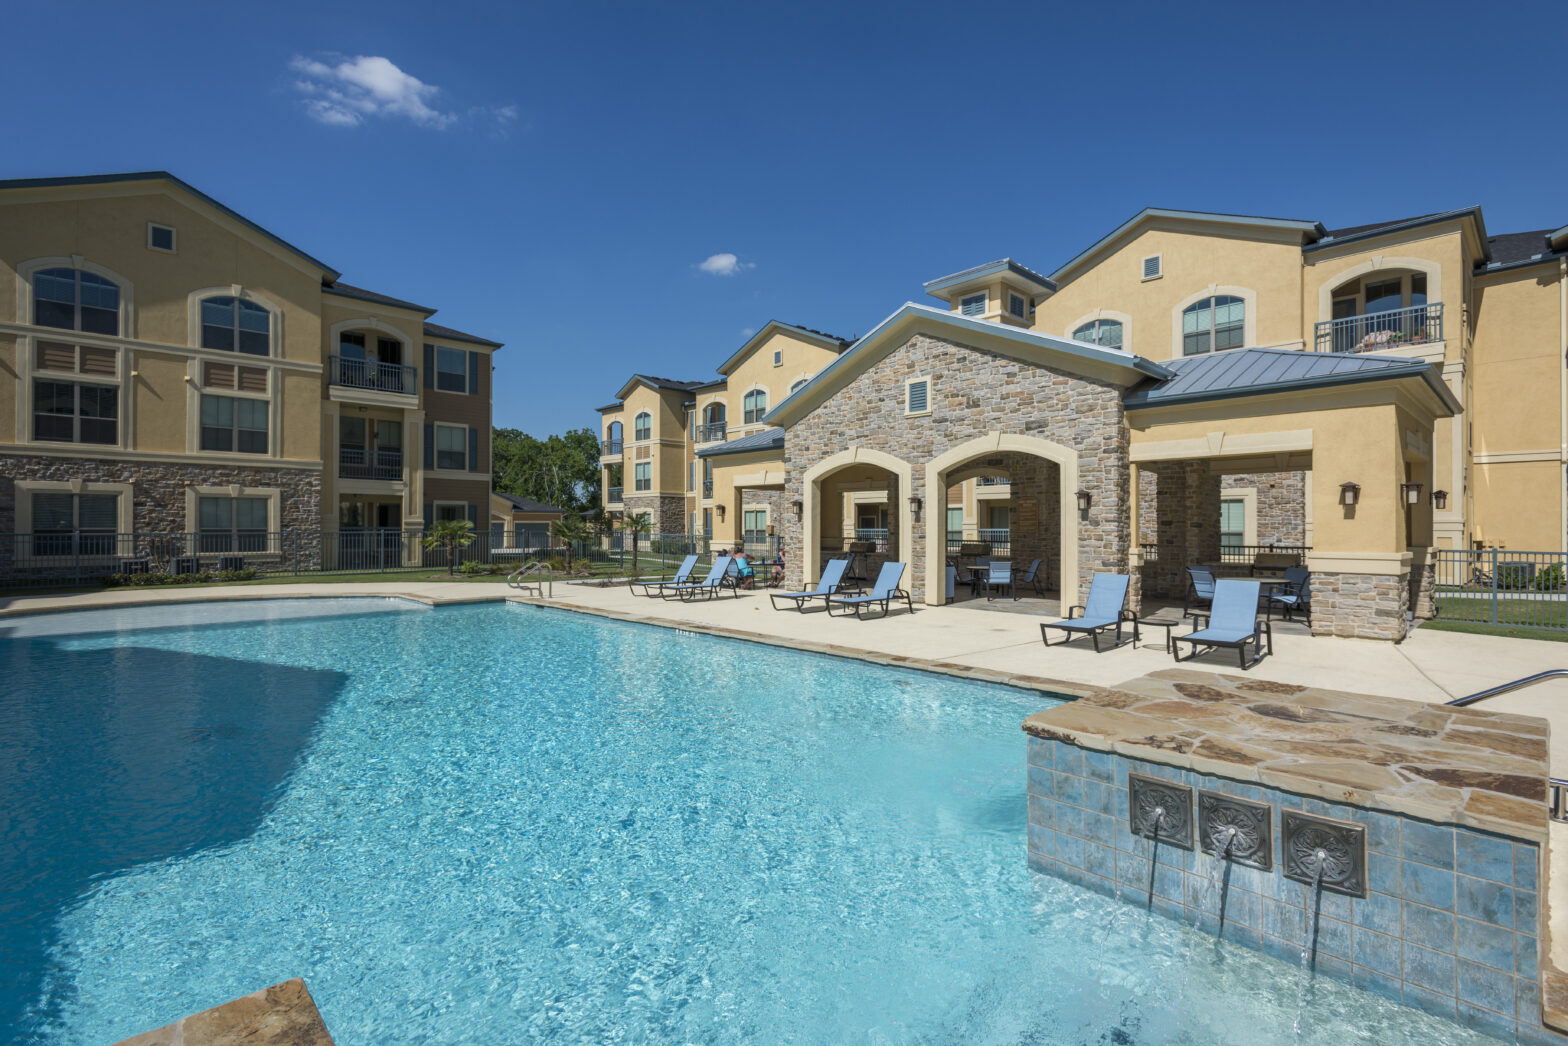 Photo of a swimming pool in front of a three-story multi-family apartment complex and clubhouse with stone facade.